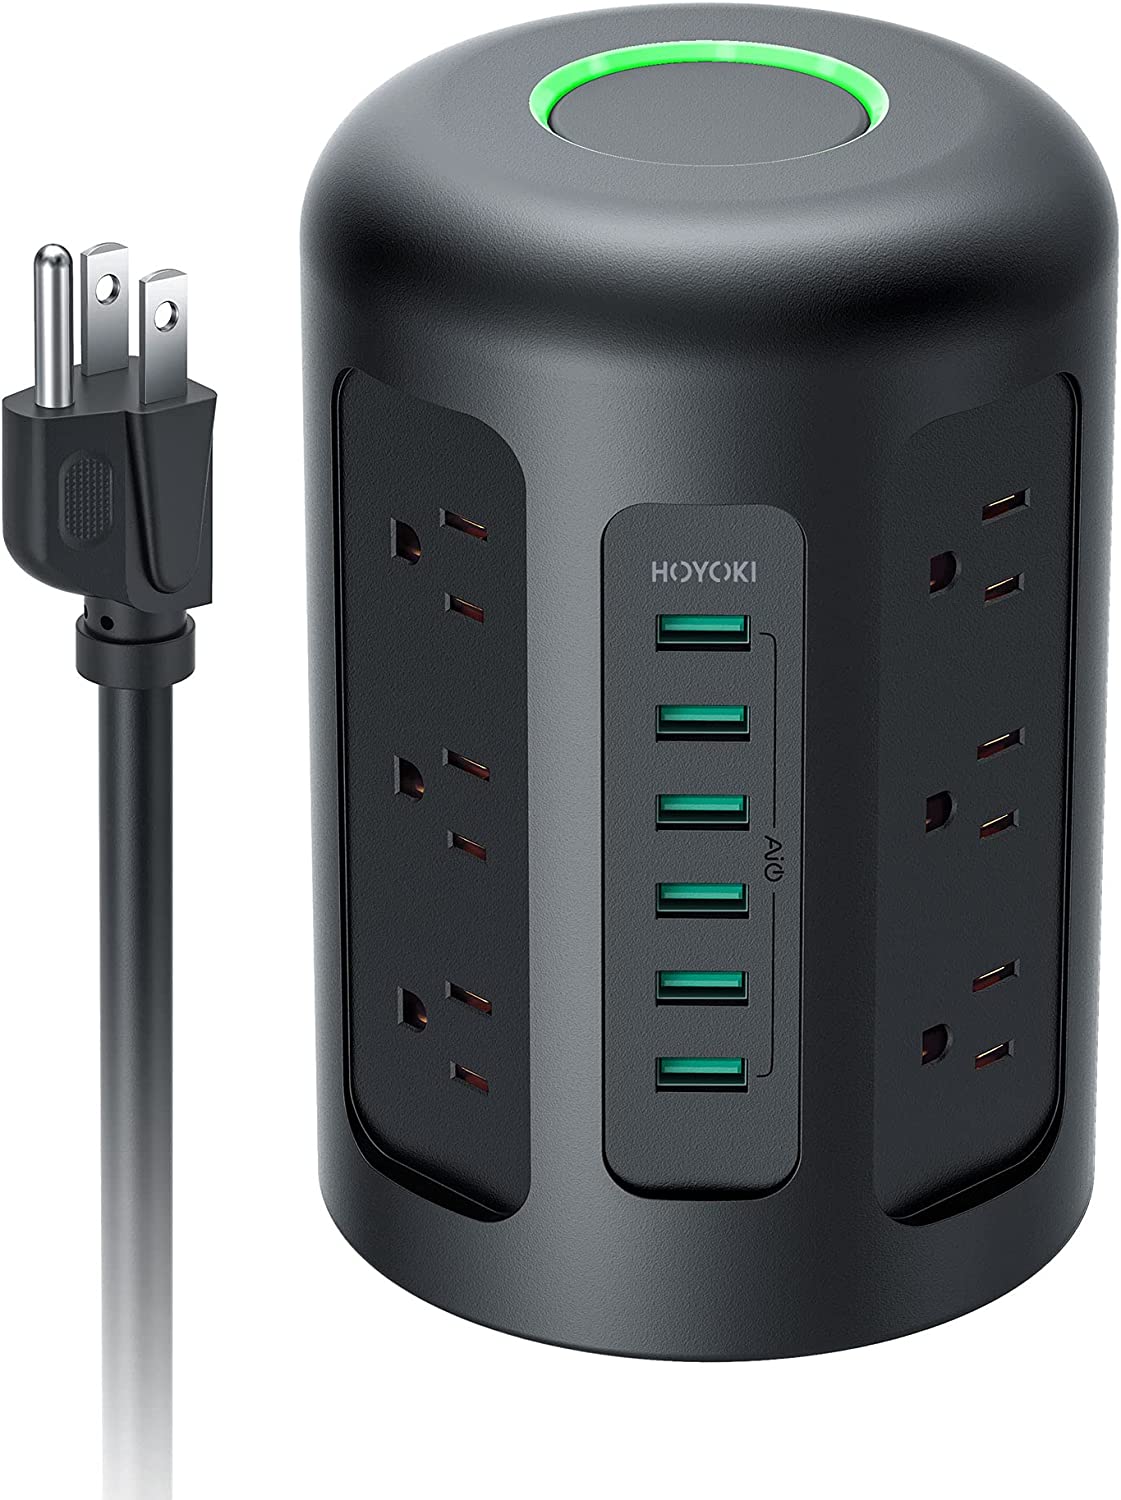 SmartTechShopping charger socket Power Strip Tower With 12 Widely Spaced AC Multiple Outlets & 6 USB Ports for Phones